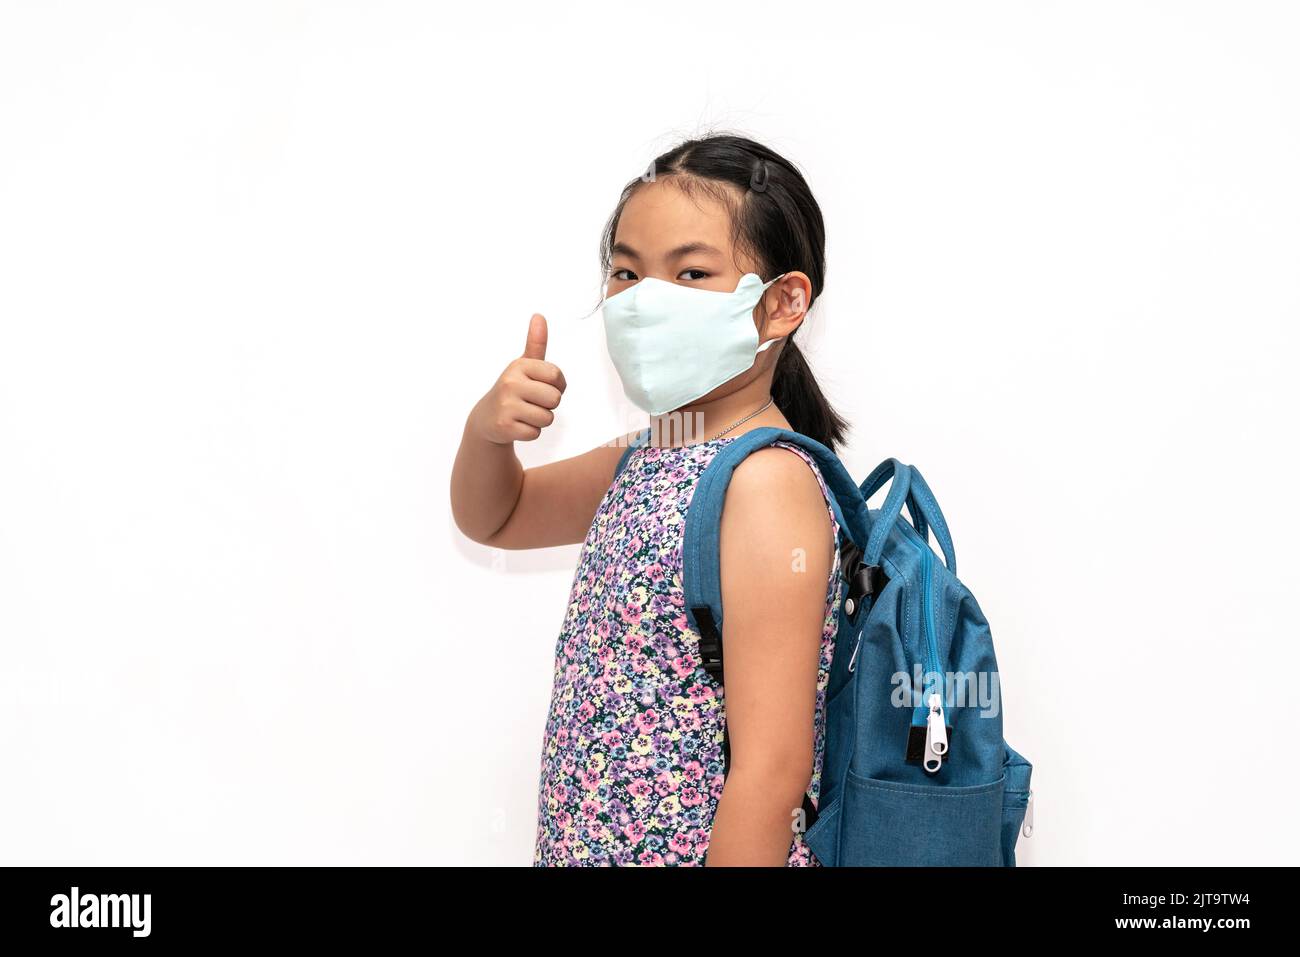 Portrait Asian child girl with facemask, carrying a blue backpack, show thumb up with confident, isolated portrait image on white background. The conc Stock Photo